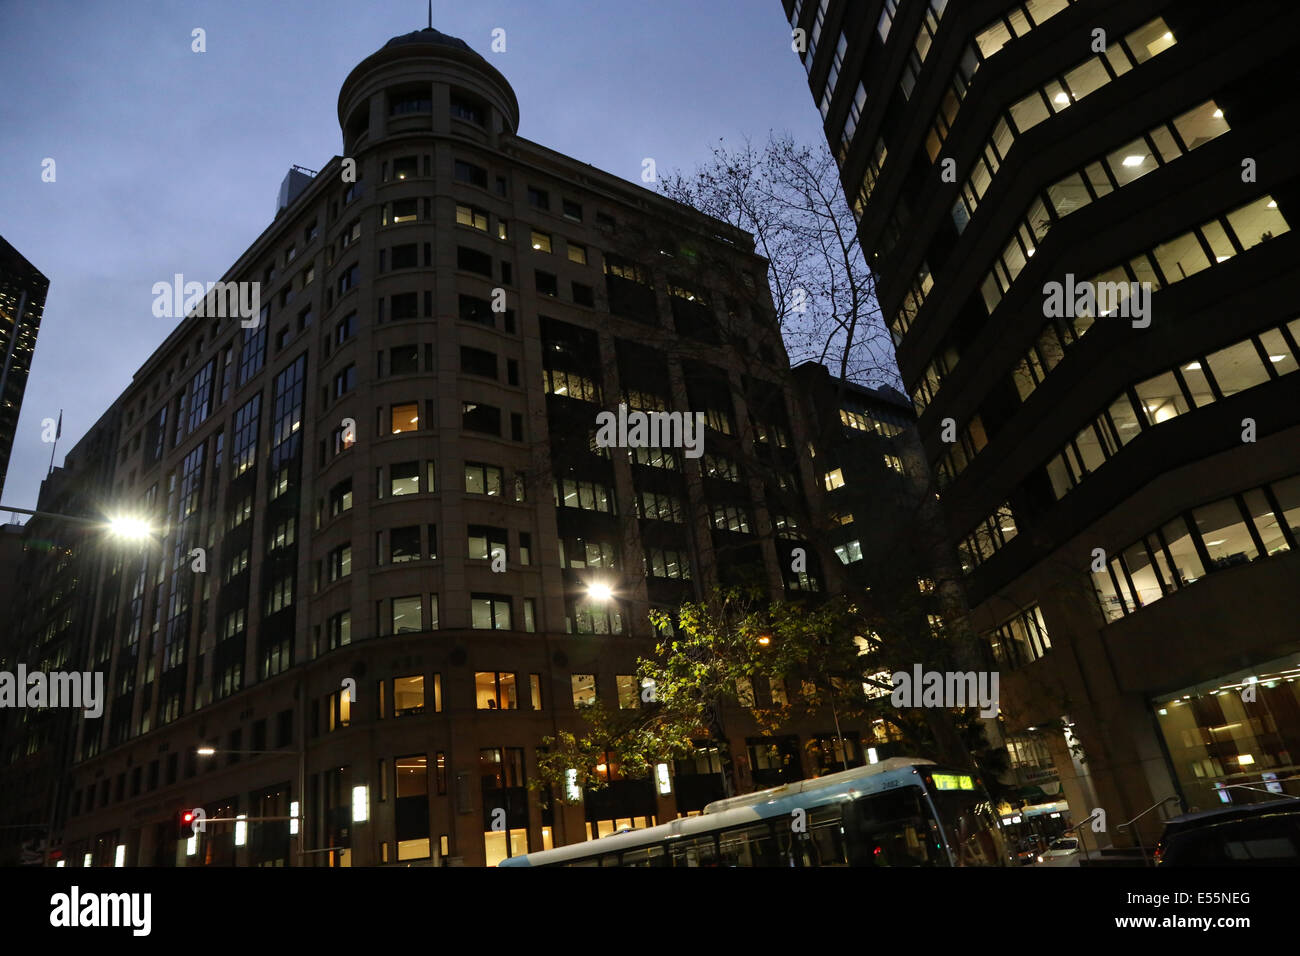 Sydney Central Business District (CBD) at night Stock Photo